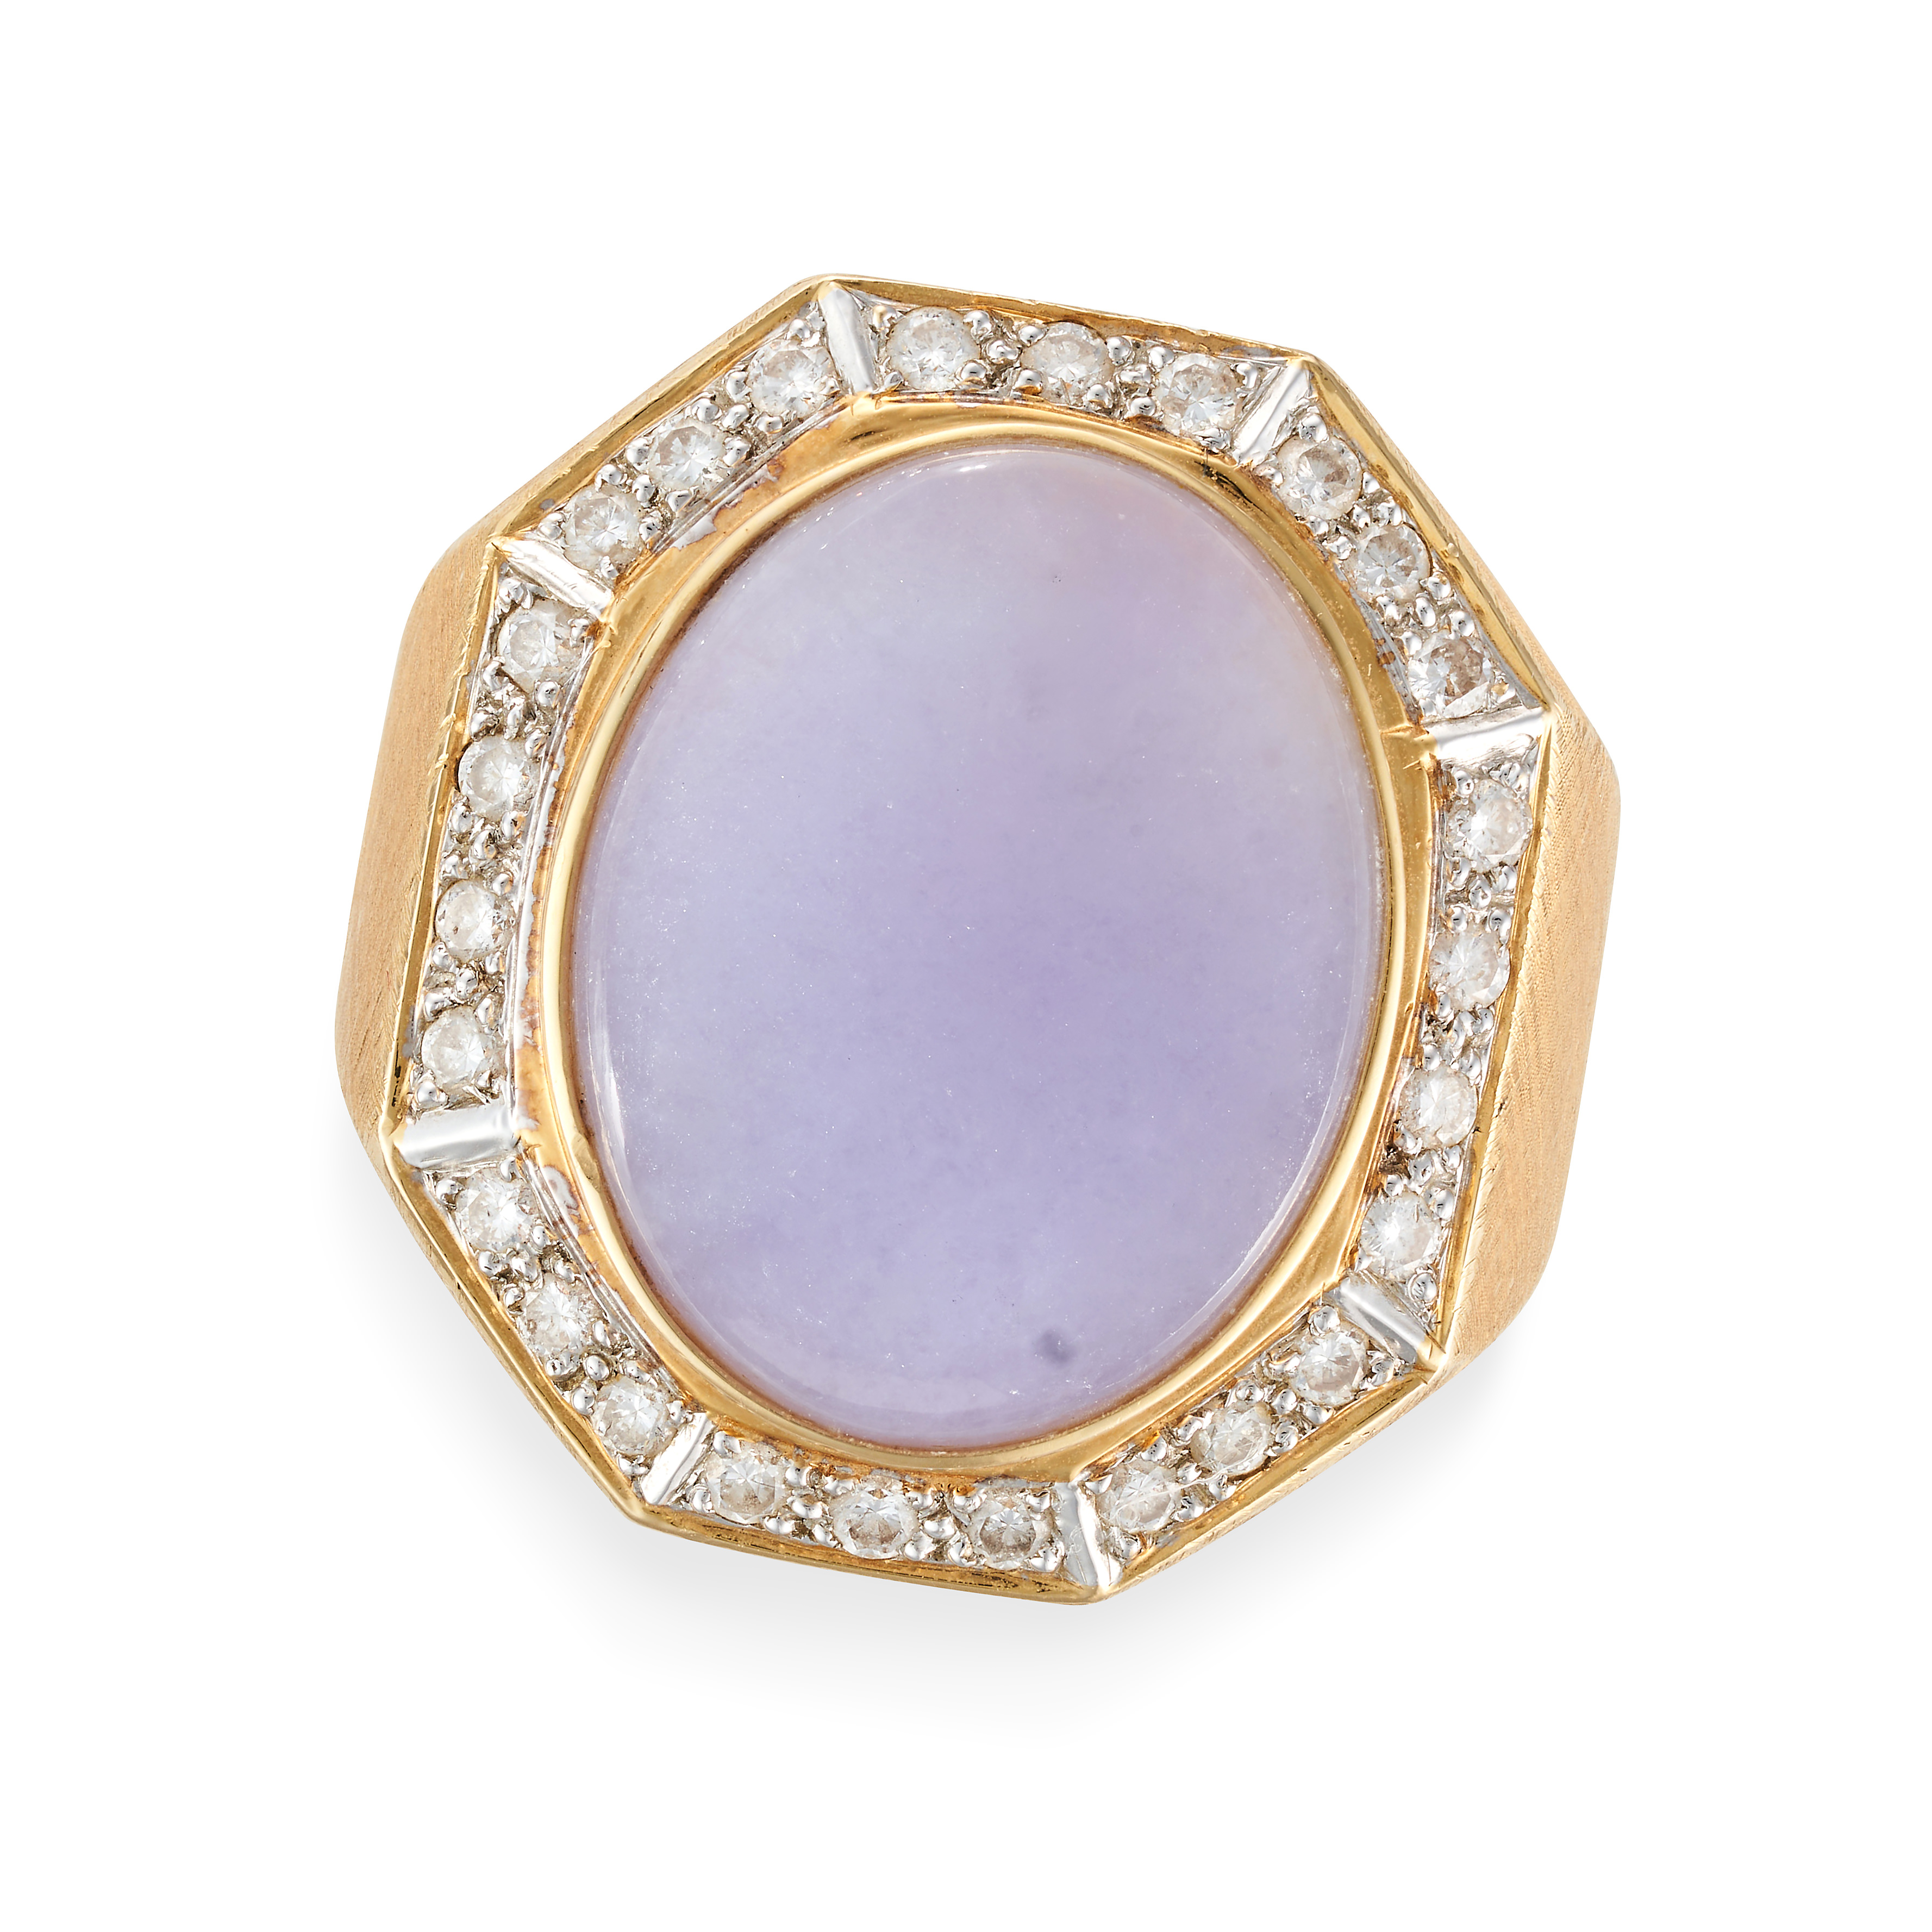 A LAVENDER JADEITE JADE AND DIAMOND RING set with an oval cabochon jadeite jade in a border of ro...